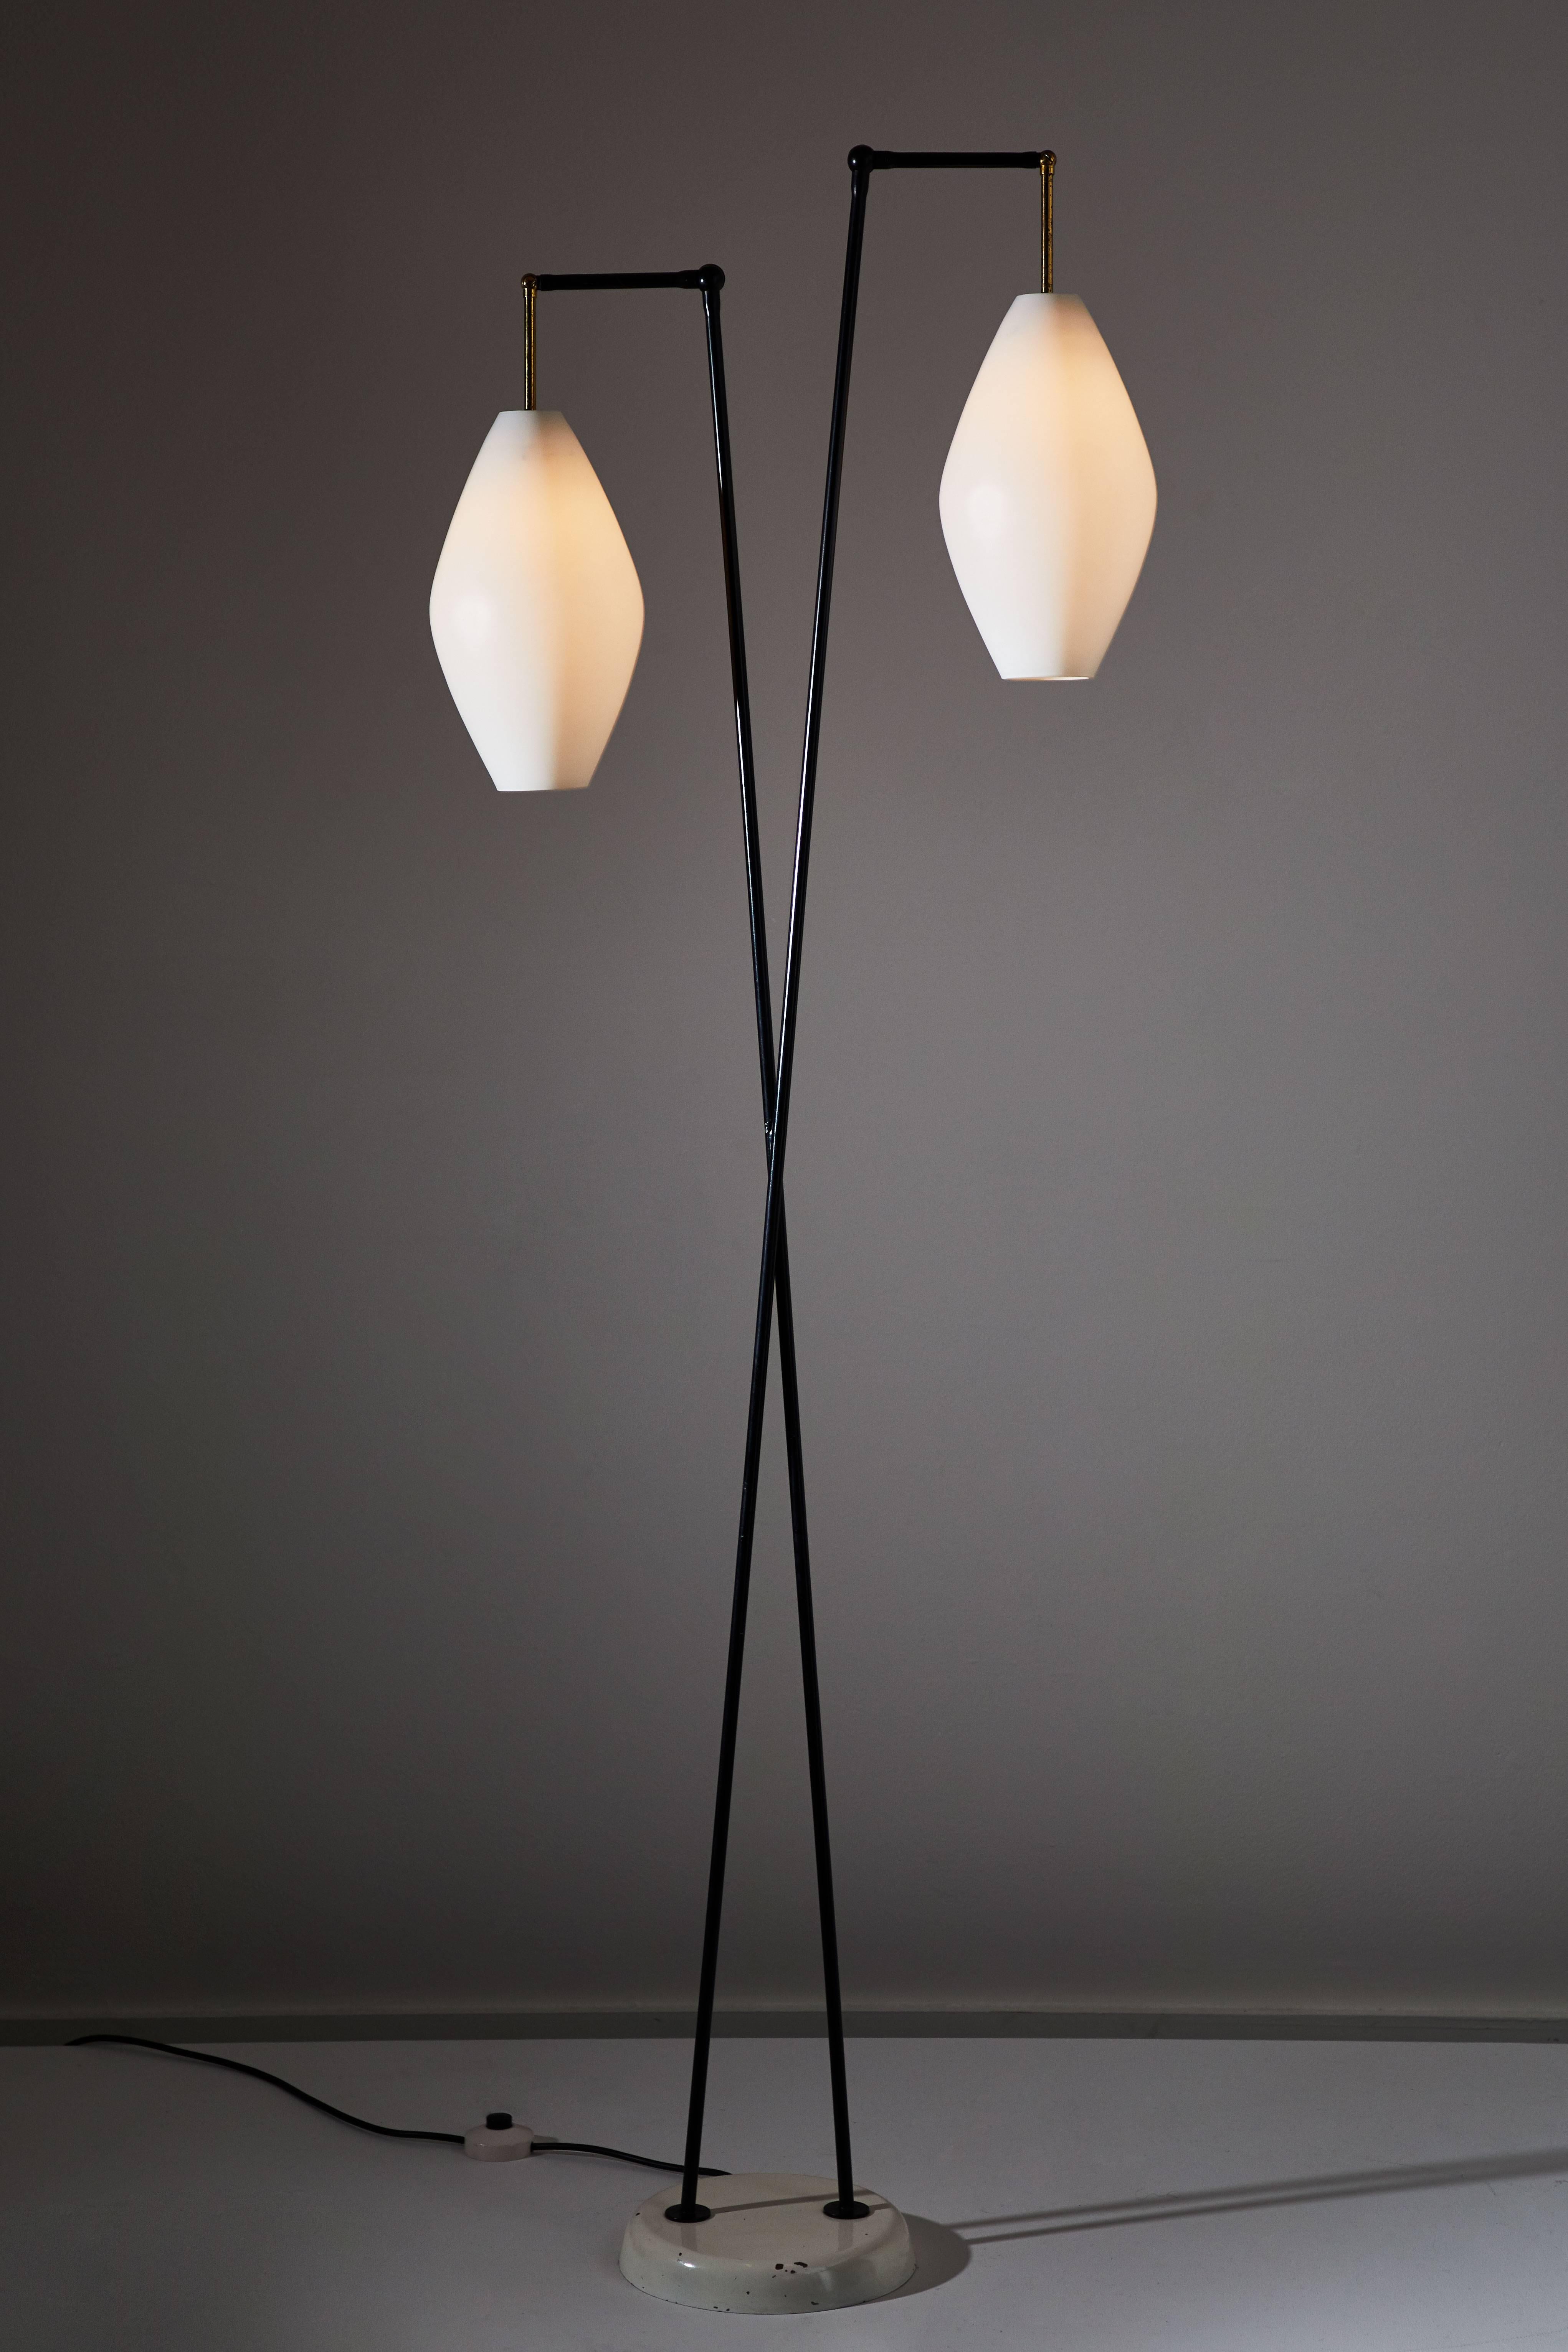 Floor lamp manufactured by Stilnovo in Italy, circa 1950s. Brushed satin glass shades, brass hardware, enameled metal stem and base. Original cord with step switch. Each shade takes one E27 75w maximum bulb.